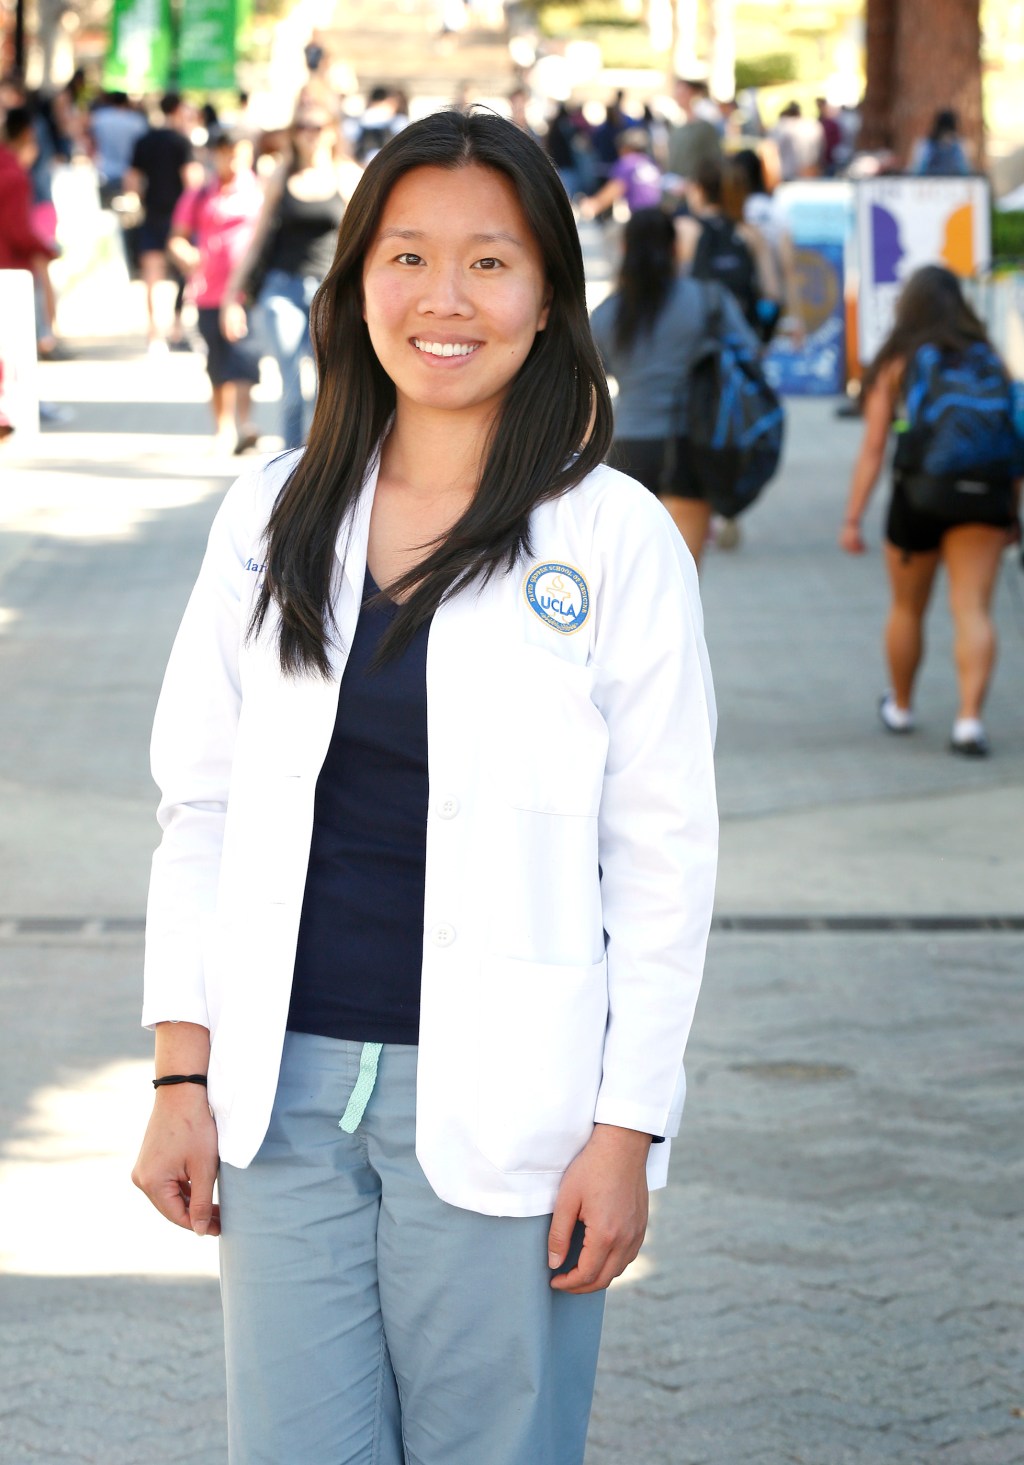 02/25/16 /LOS ANGELES/ Chinese Mexican and UCLA student Marcela Zhou (Photo by Aurelia Ventura/La Opinion)